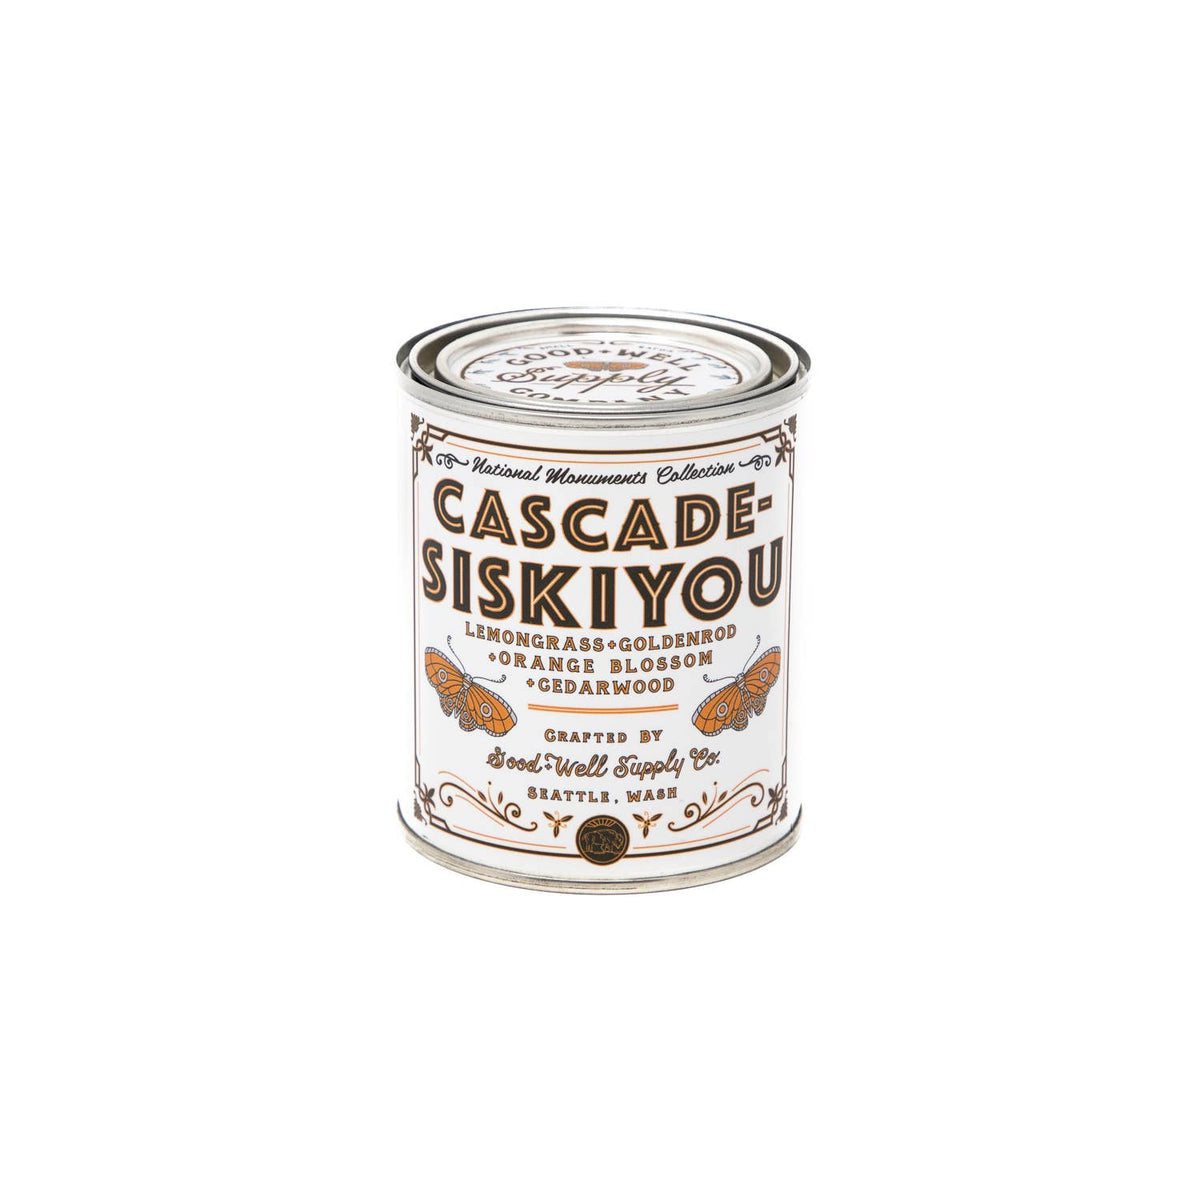 Good &amp; Well Supply Co. Cascade-Siskyou Candle tin with a label on it.